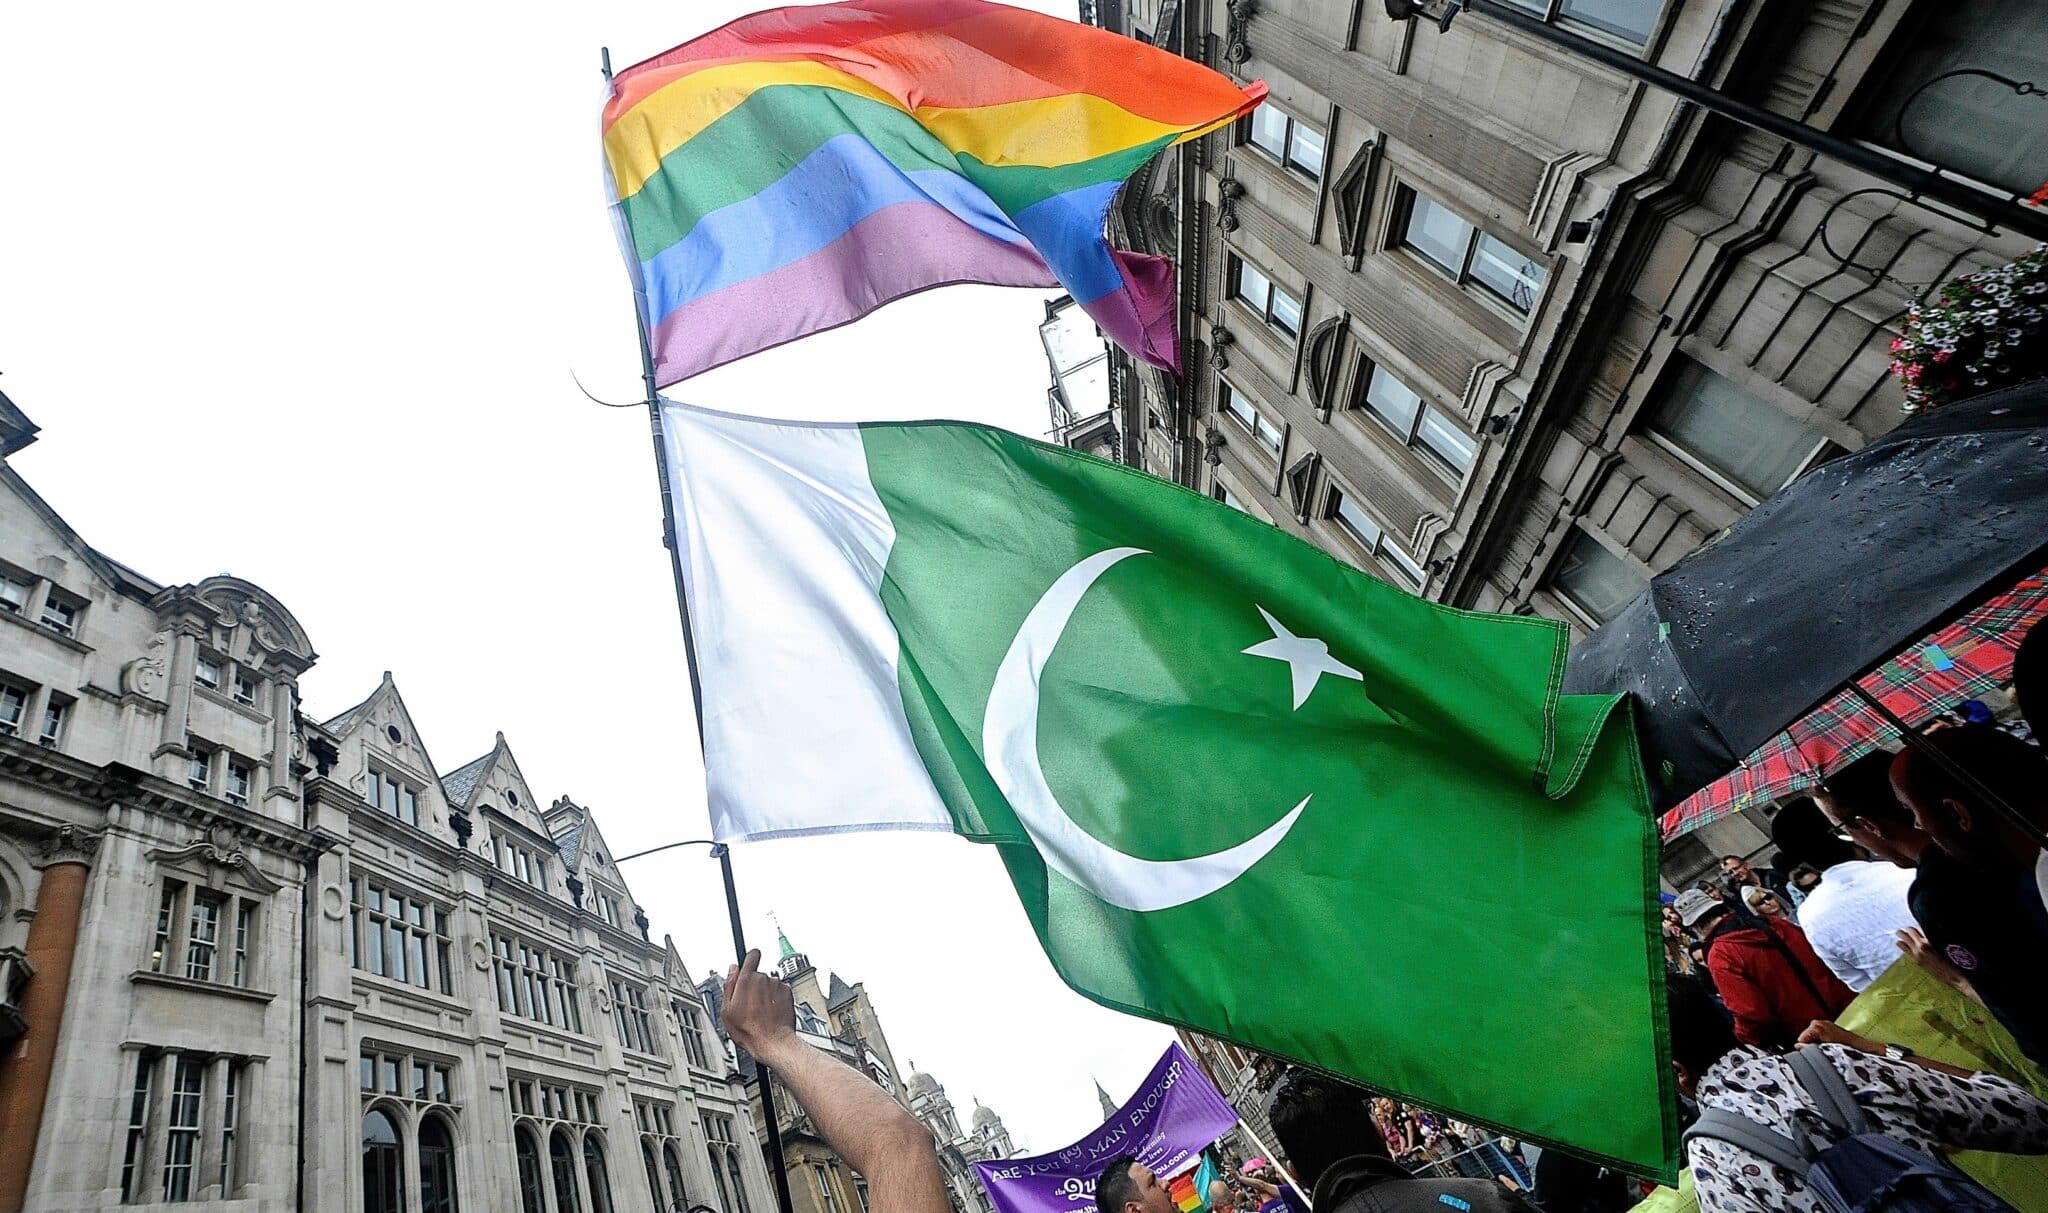 Council of Islamic Ideology calls trans rights law un-Islamic in clash with Shariat Court